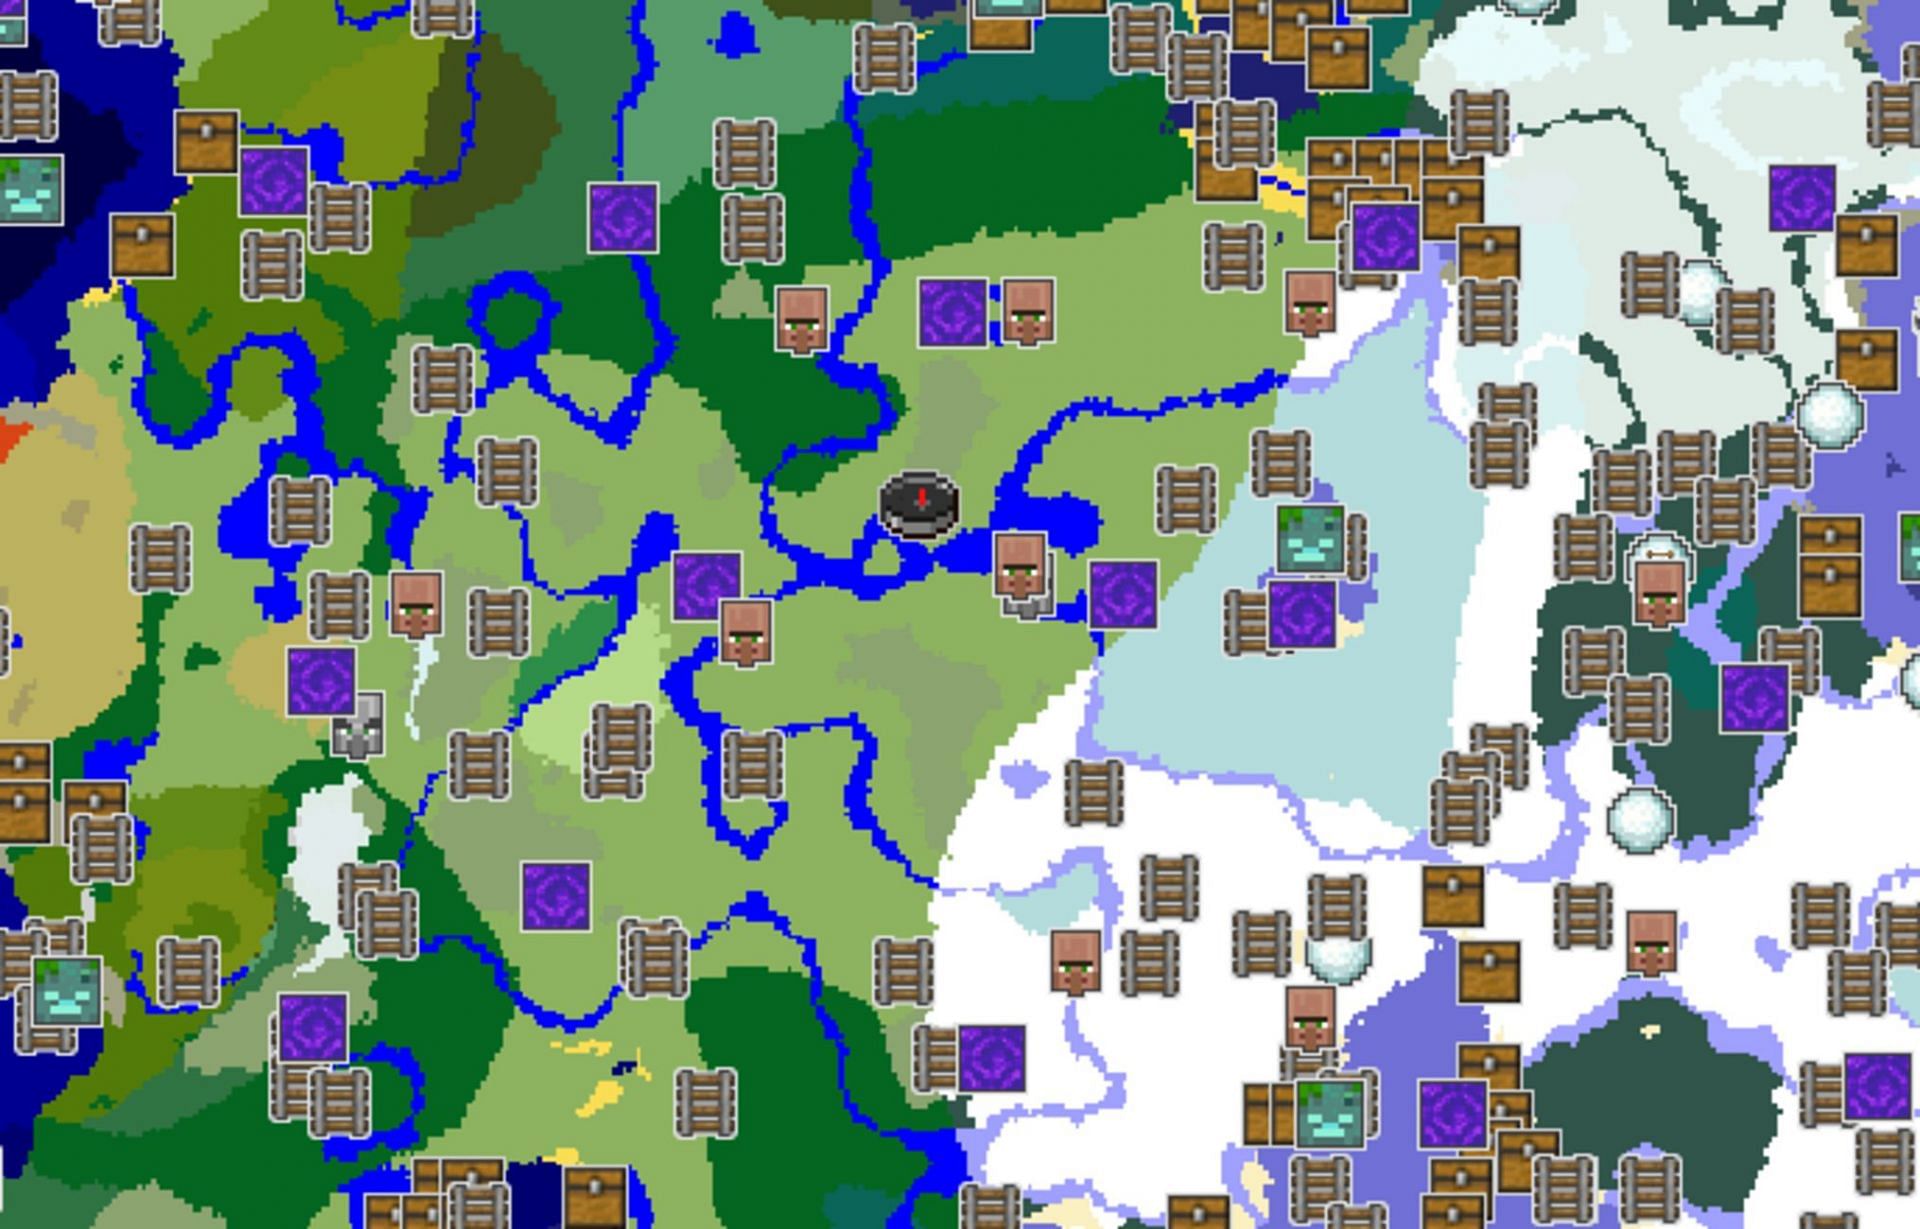 This seed comes loaded with villages (Image via Chunkbase)